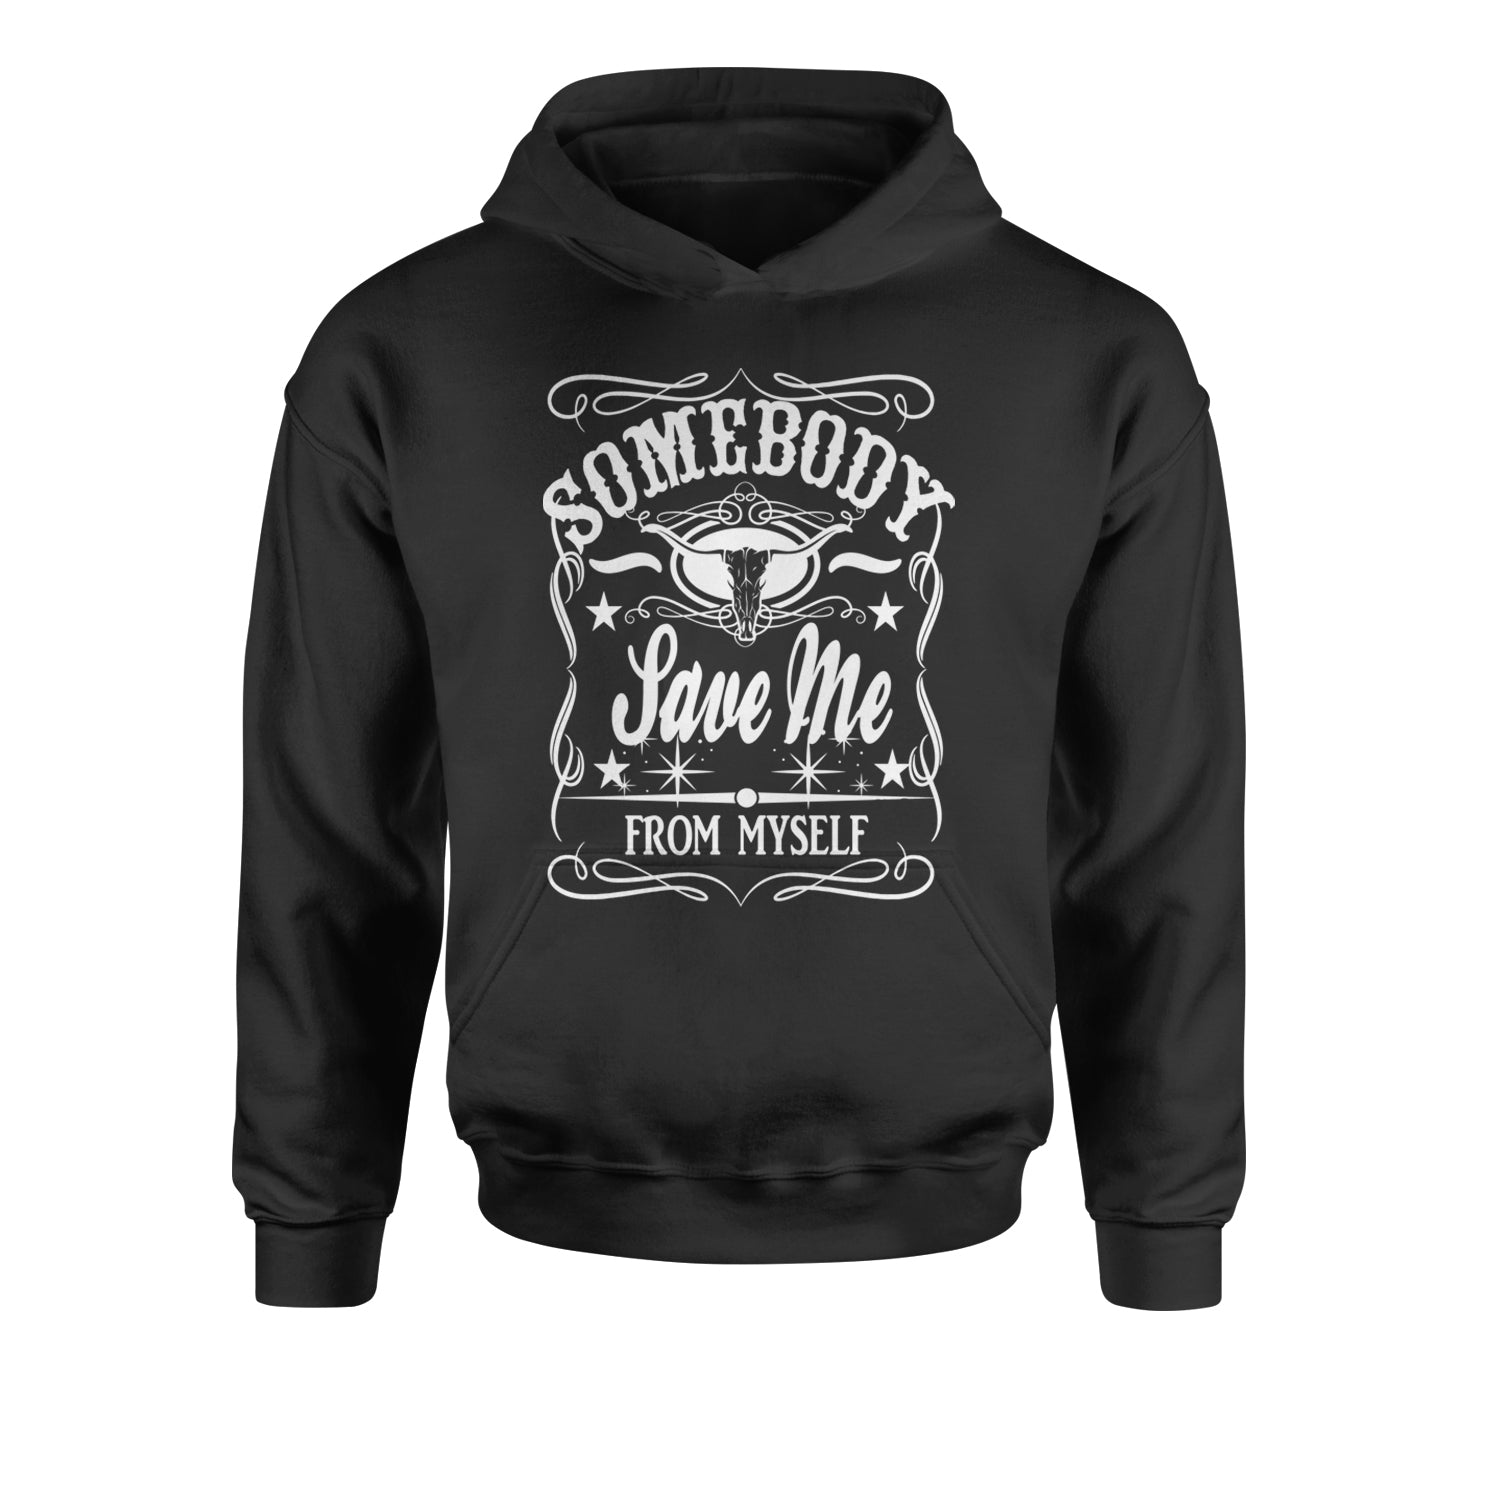 Somebody Save Me From Myself Son Of A Sinner Youth-Sized Hoodie